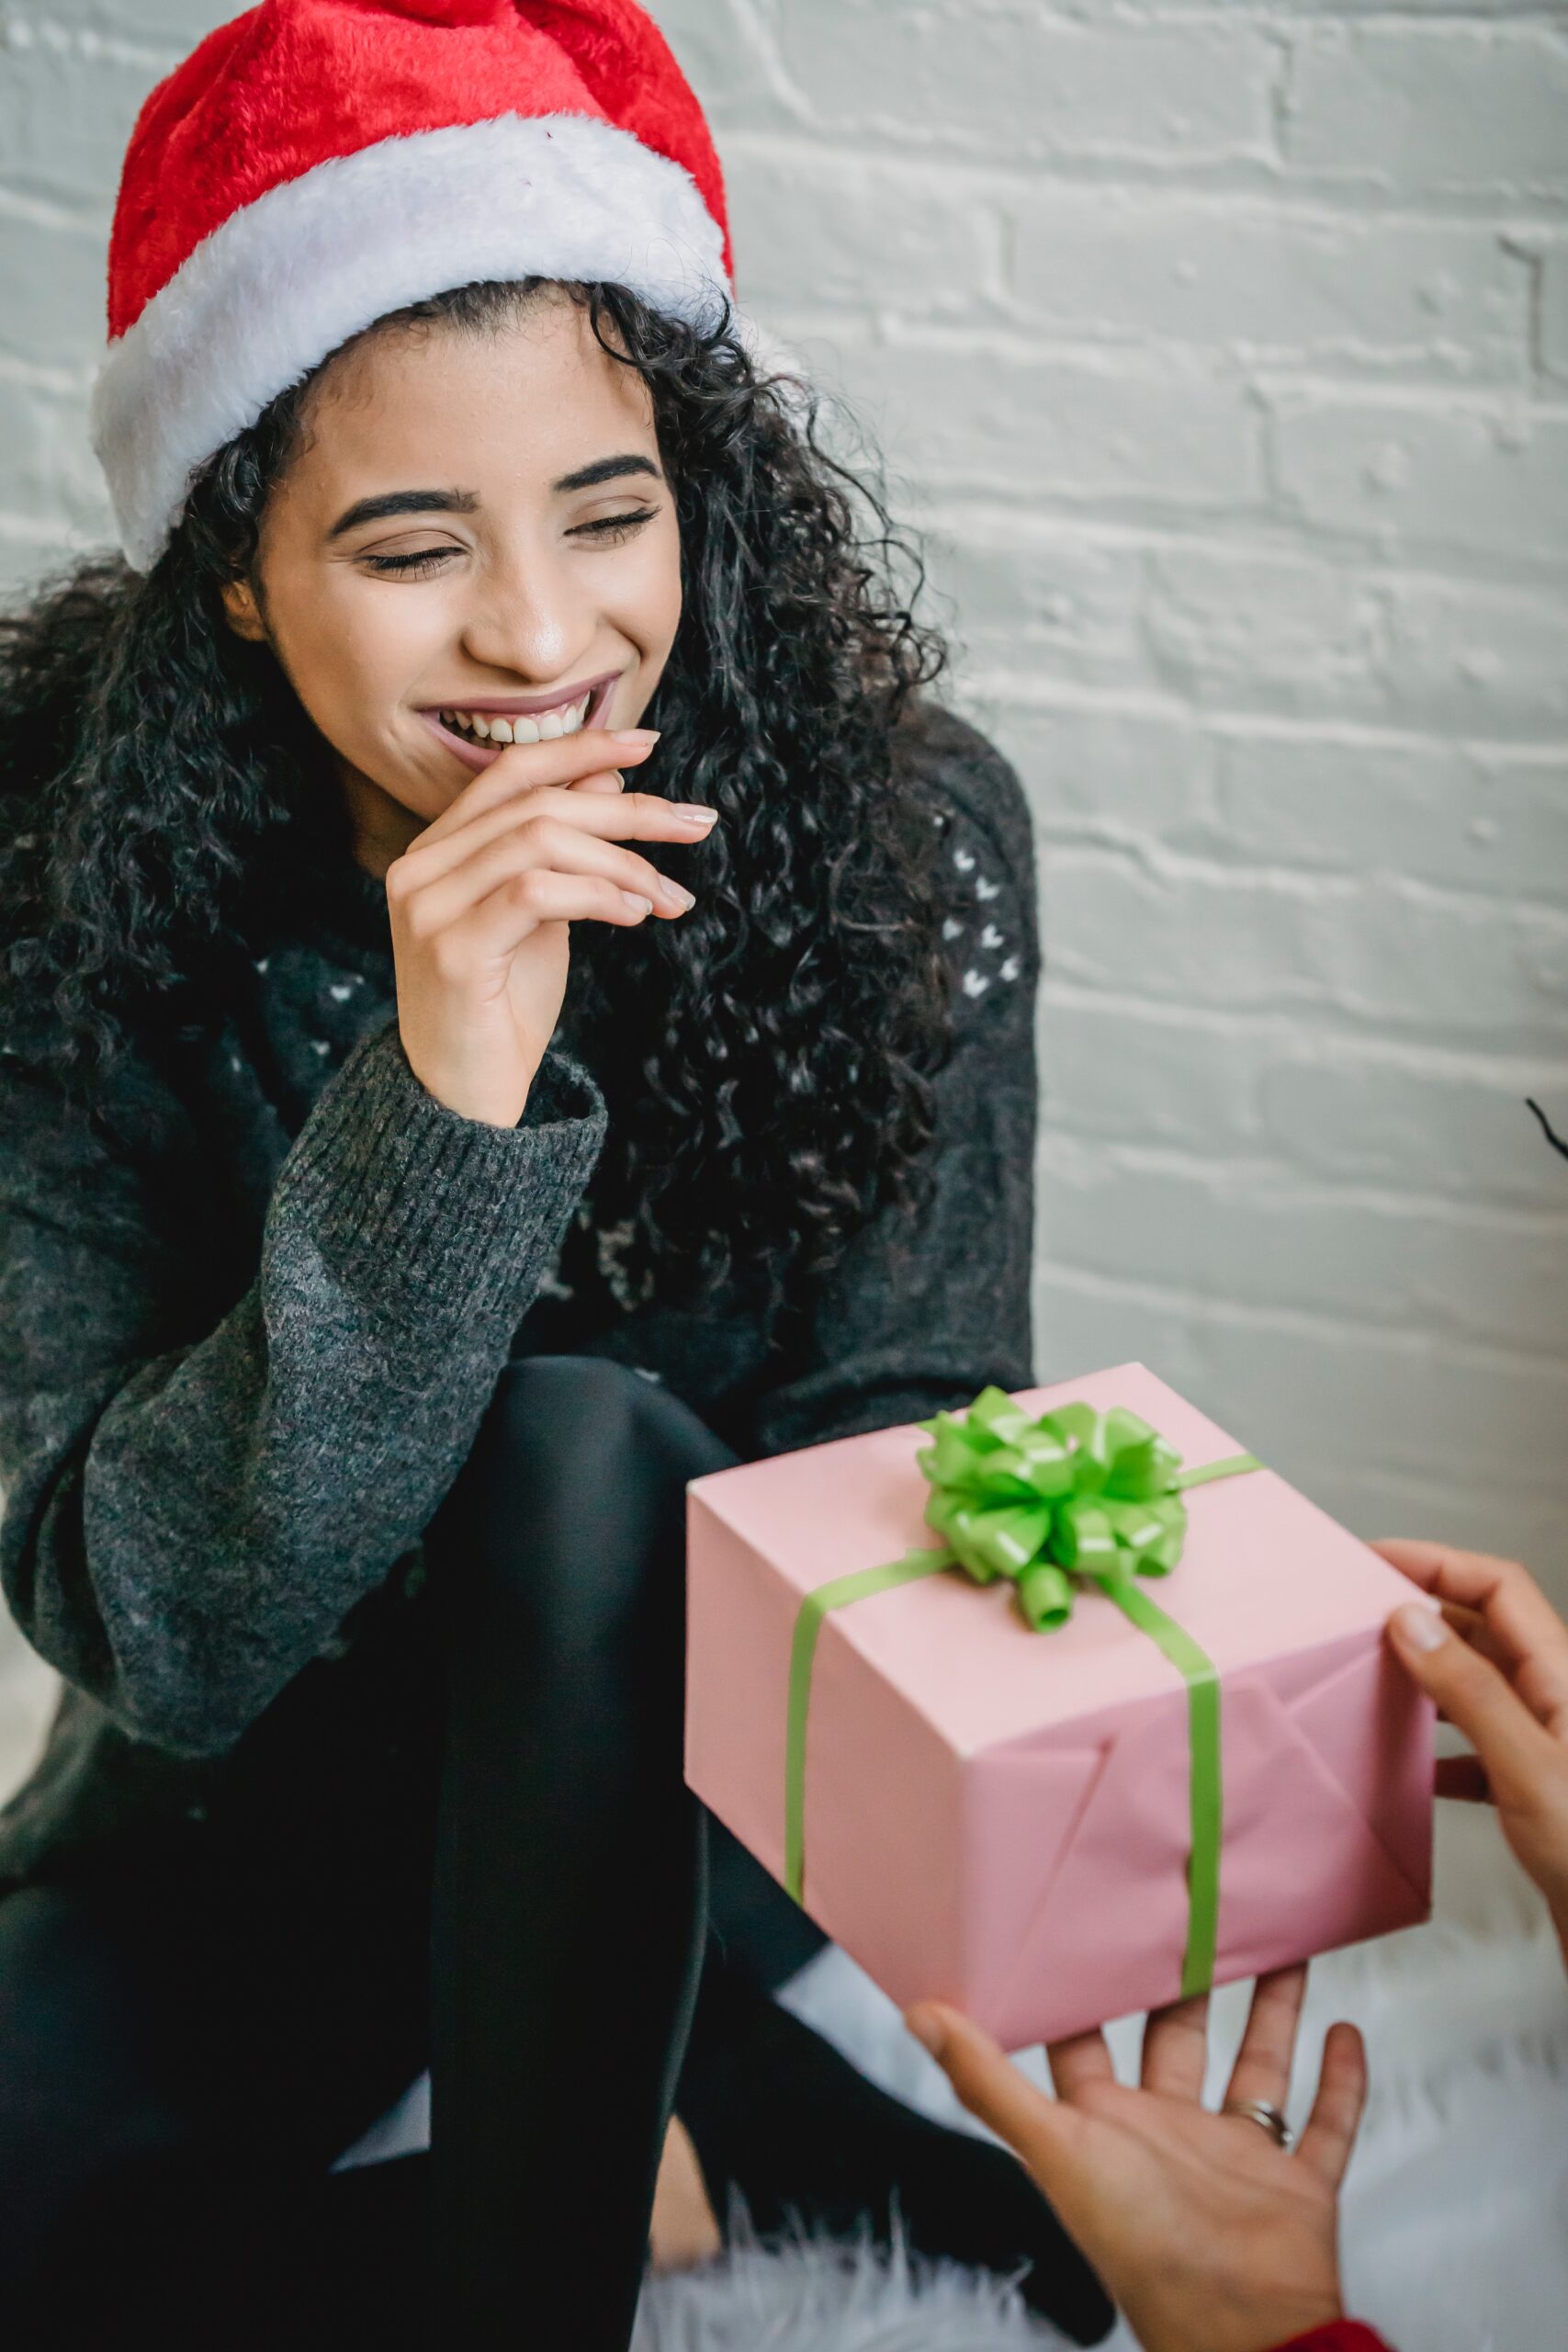 woman wearing a Santa hat getting a gift image